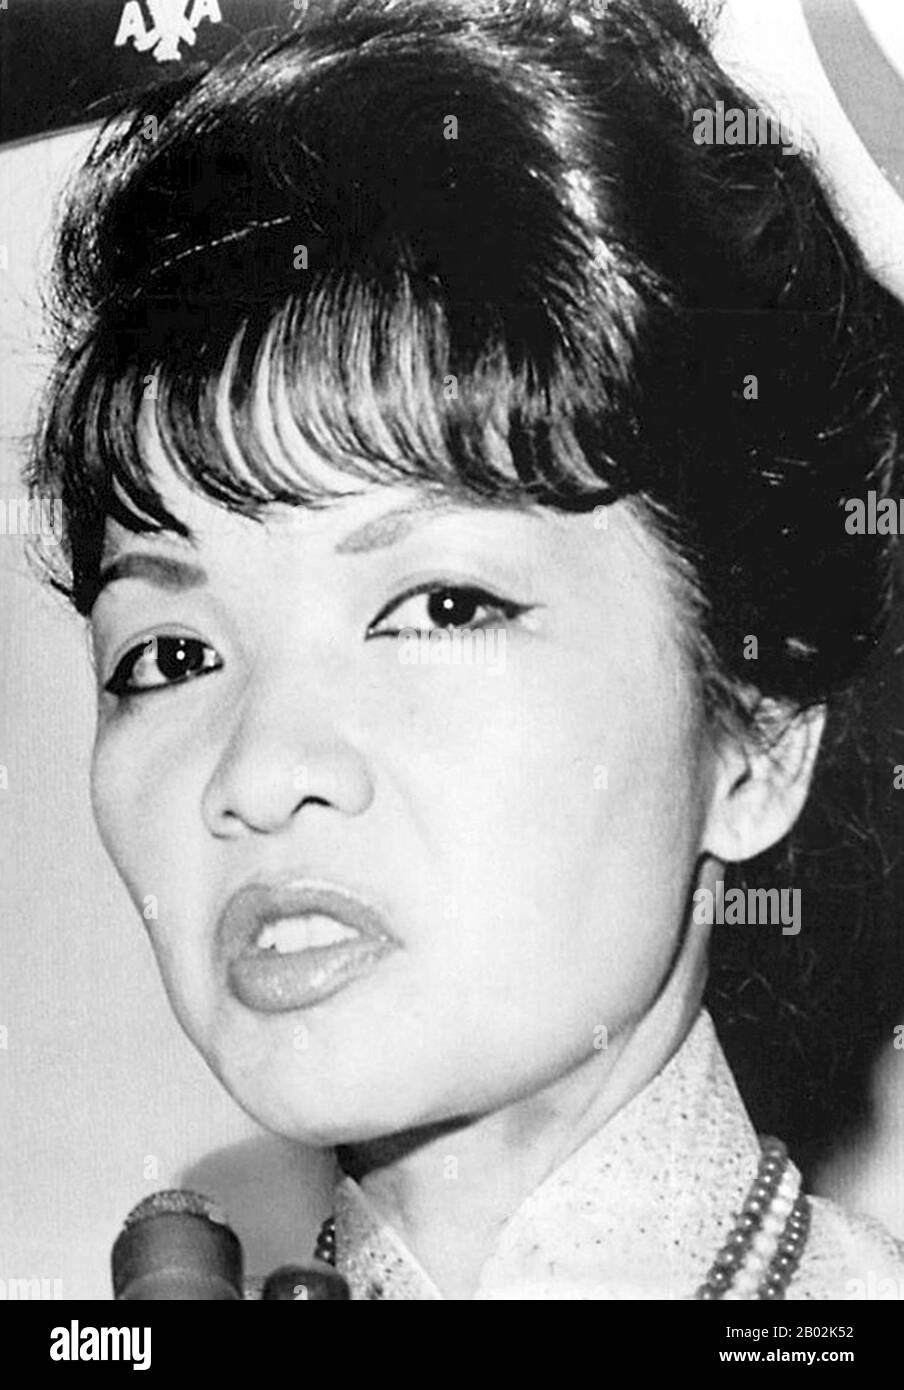 Wife tran Black and White Stock Photos & Images - Alamy